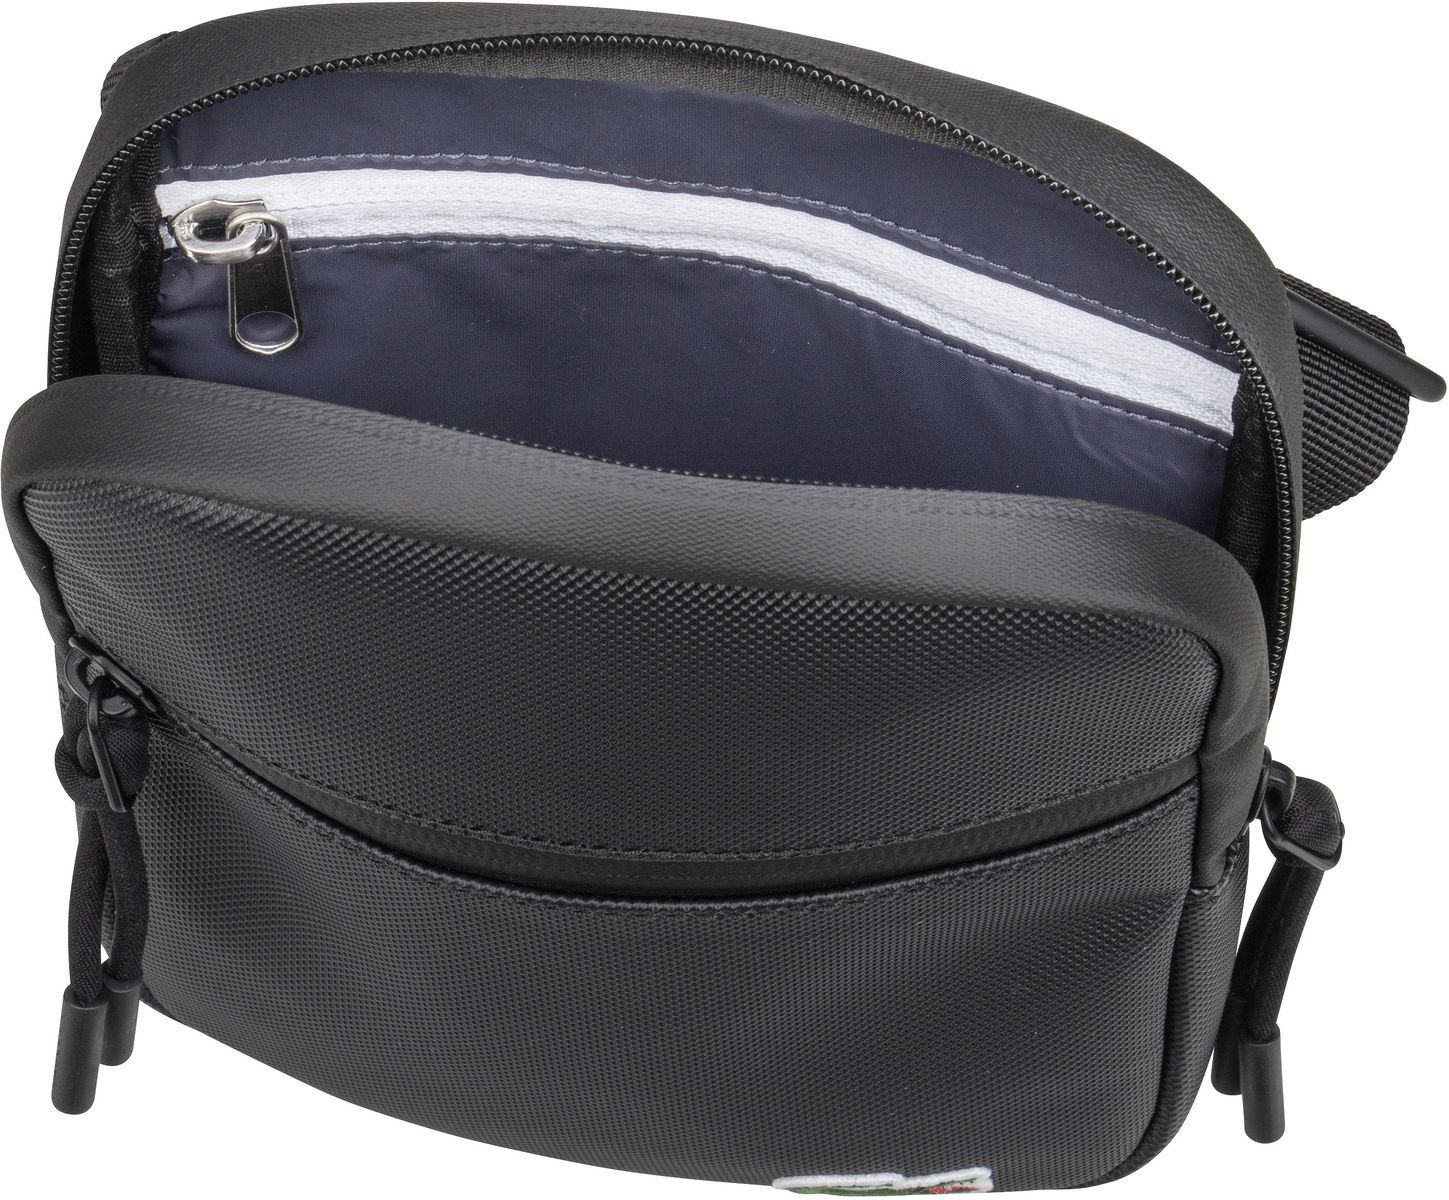 Lacoste LCST Crossover Bag 3307 - Black